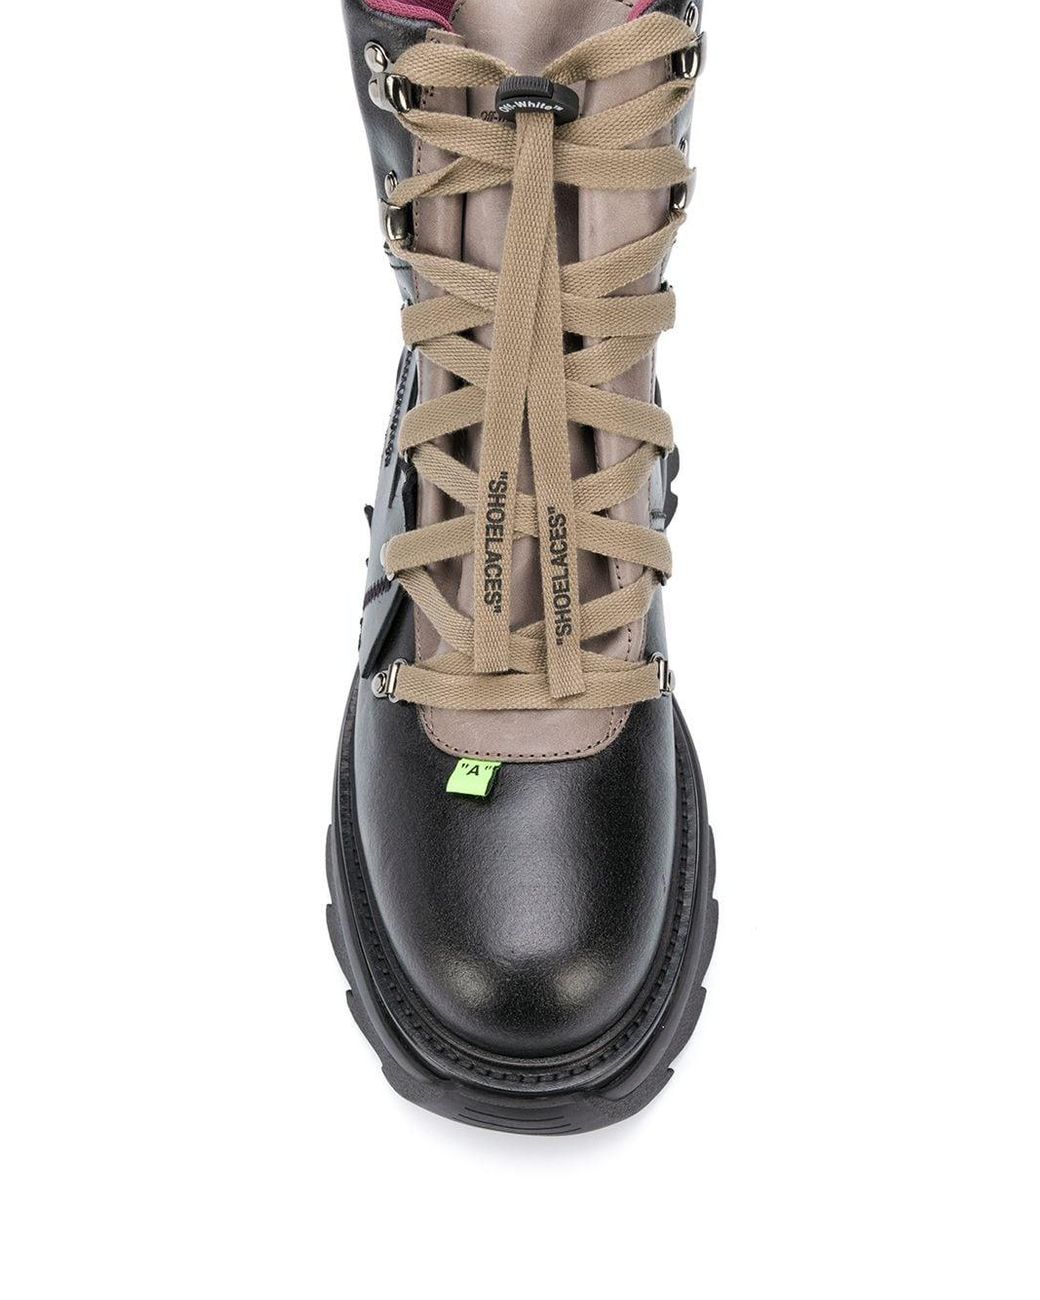 Off-White c/o Virgil Abloh Western Leather Blade Boots in Black